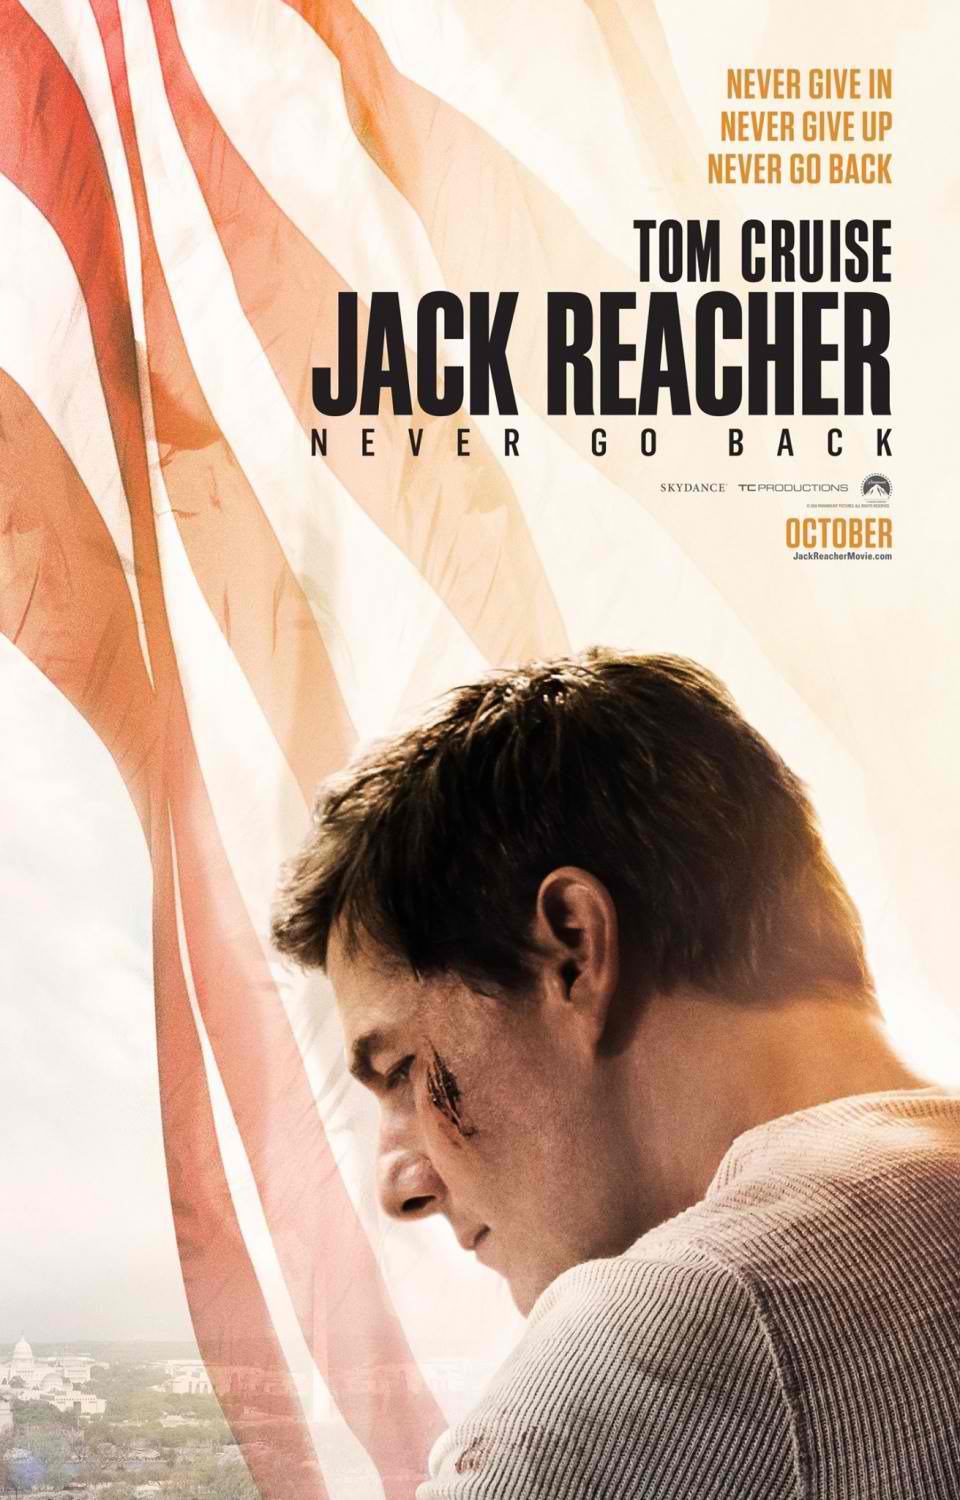 Cruise goes solo in U.S. posters of “JACK REACHER: NEVER GO BACK”